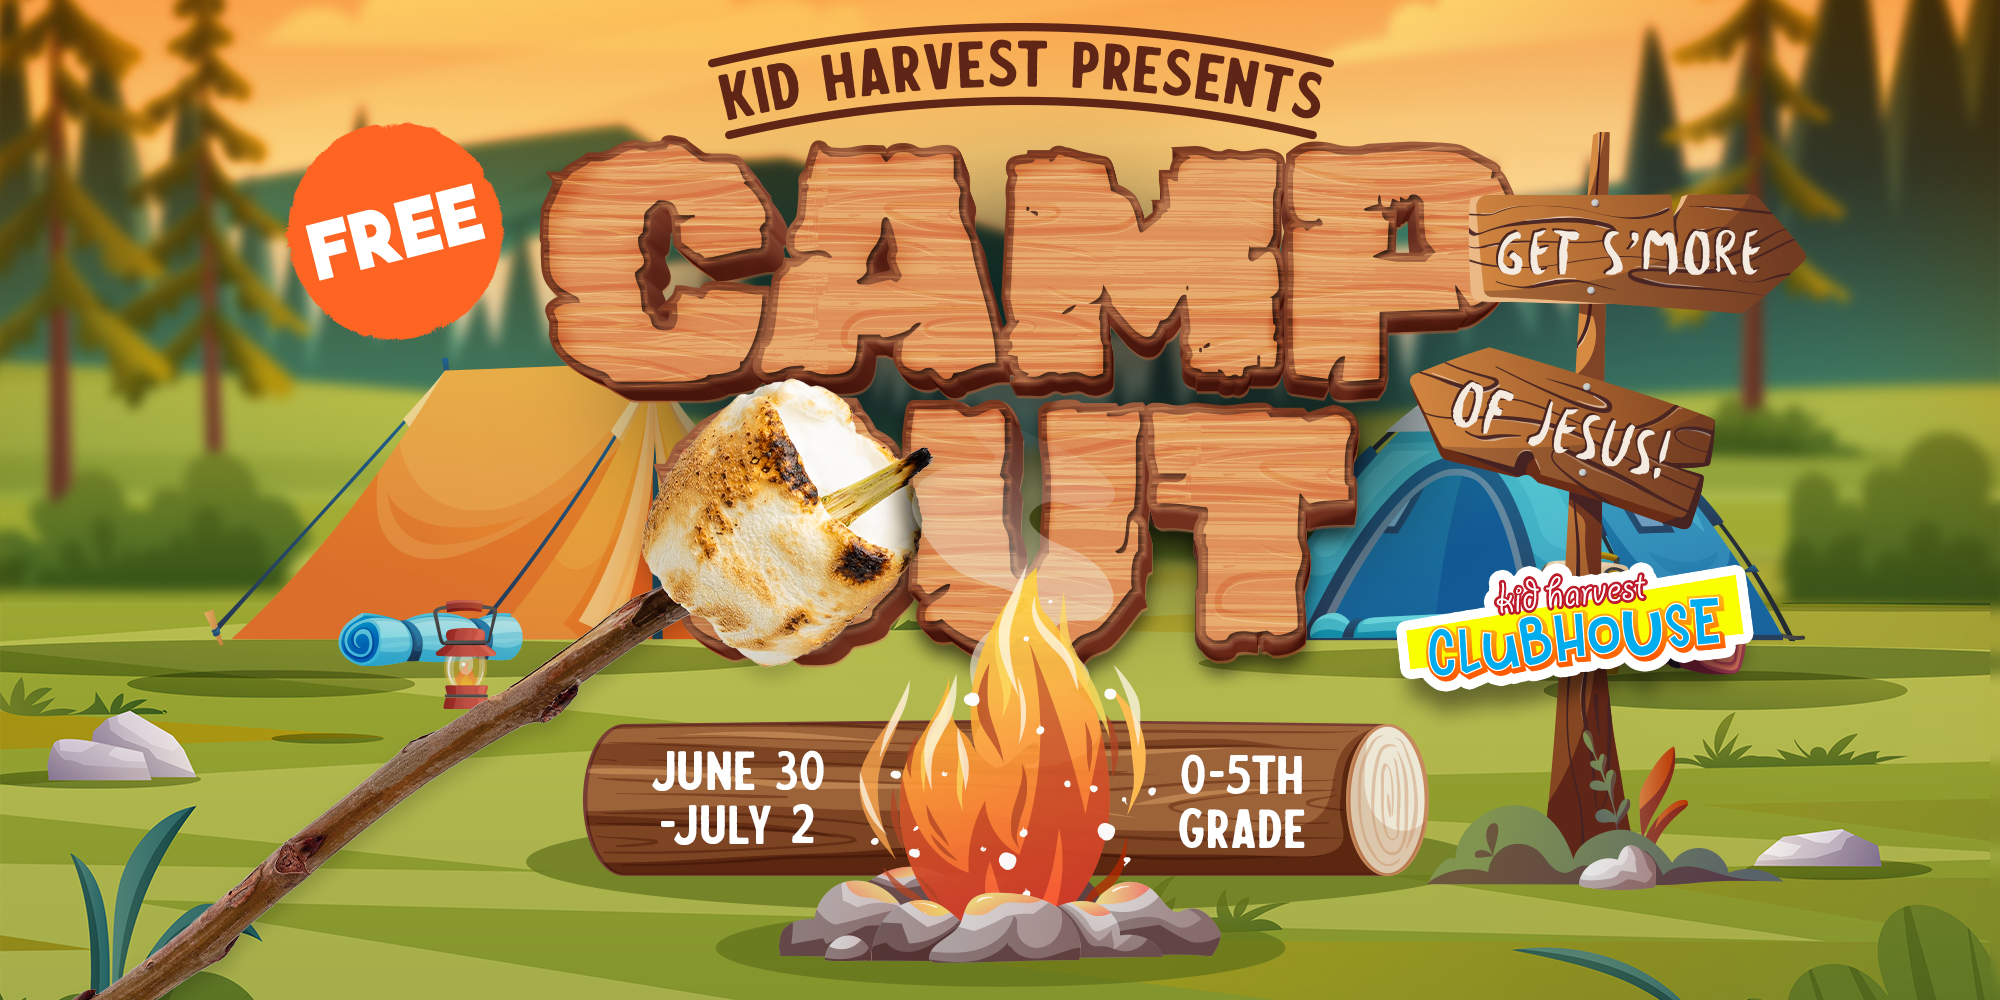 Kid Harvest Presents Space Camp July 1 2 3 Ages 0 - 5th Grade